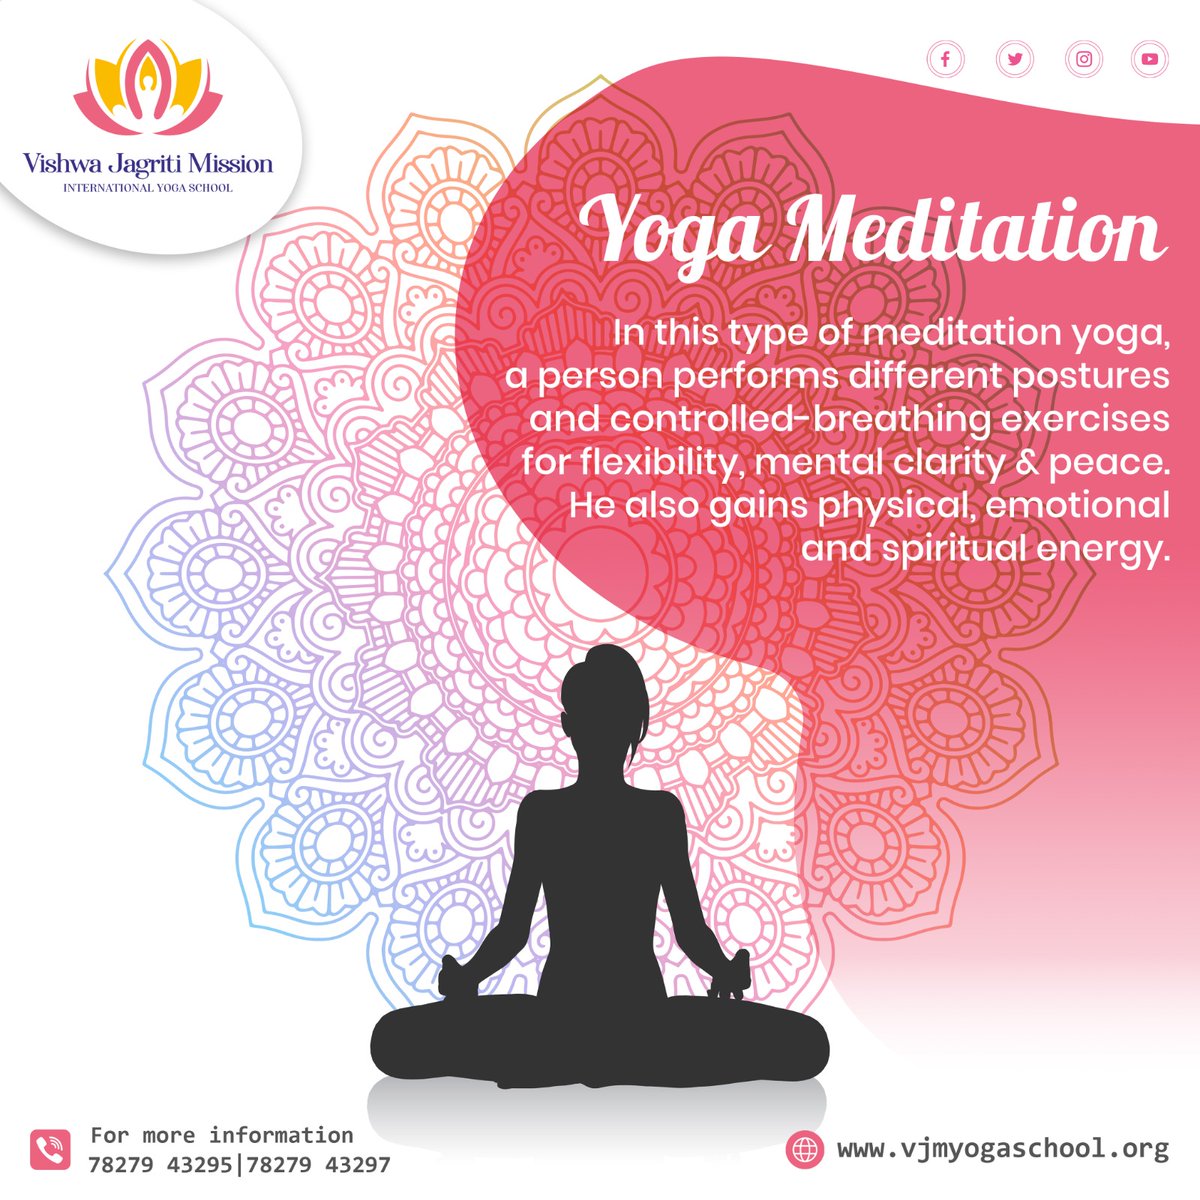 Yoga Meditation – In this type of meditation yoga, a person performs different postures and controlled-breathing exercises for flexibility, mental clarity & peace. He also gains physical, emotional and spiritual energy.
#yogameditation #flexibility #mentalclarity #spiritualenergy